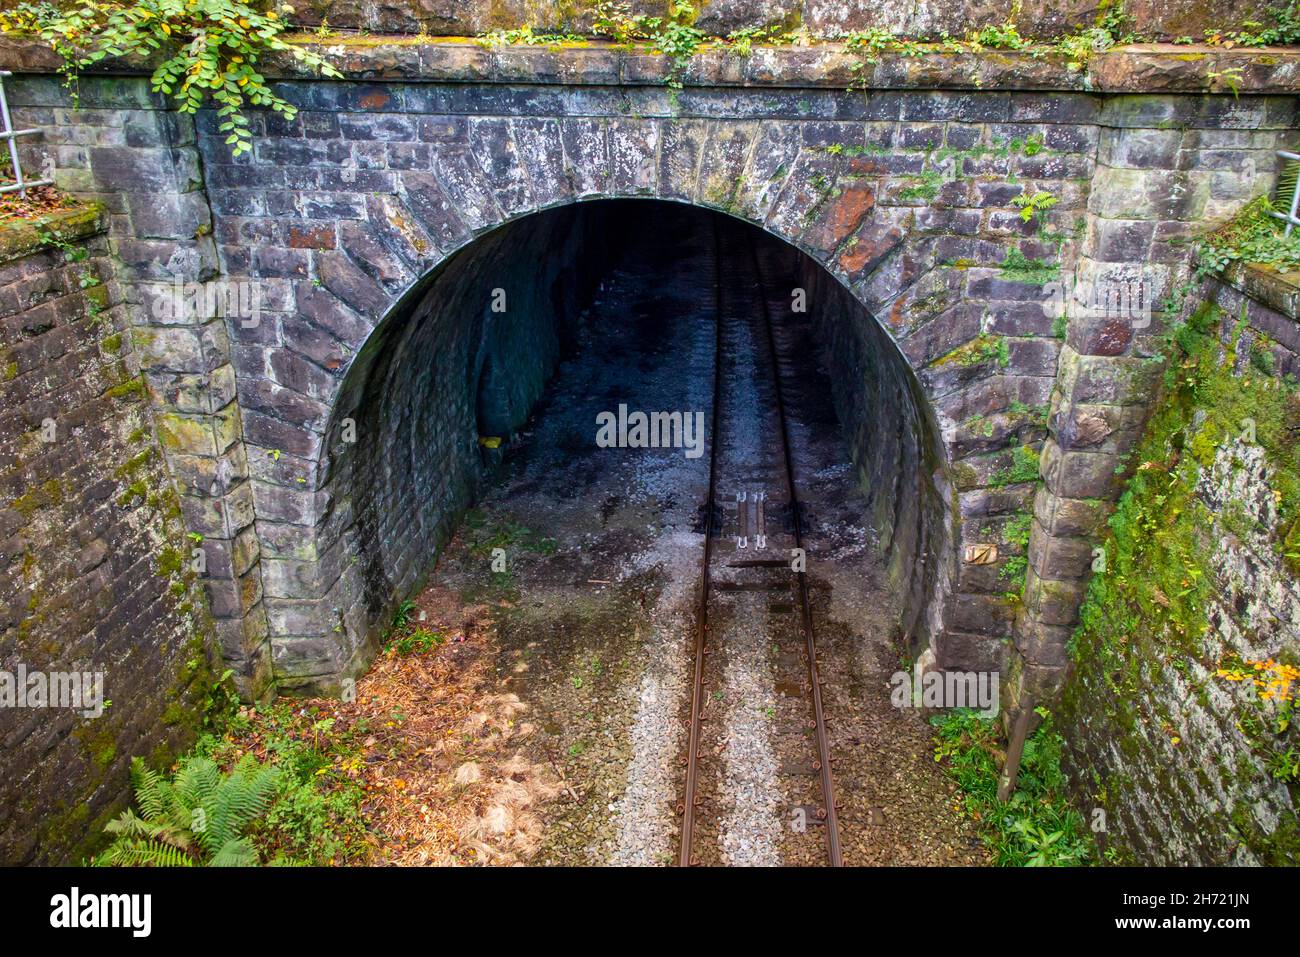 Entrance to a tunnel near Cromford on the single track Matlock to Derby railway line in the Derbyshire Peak District England UK. Stock Photo